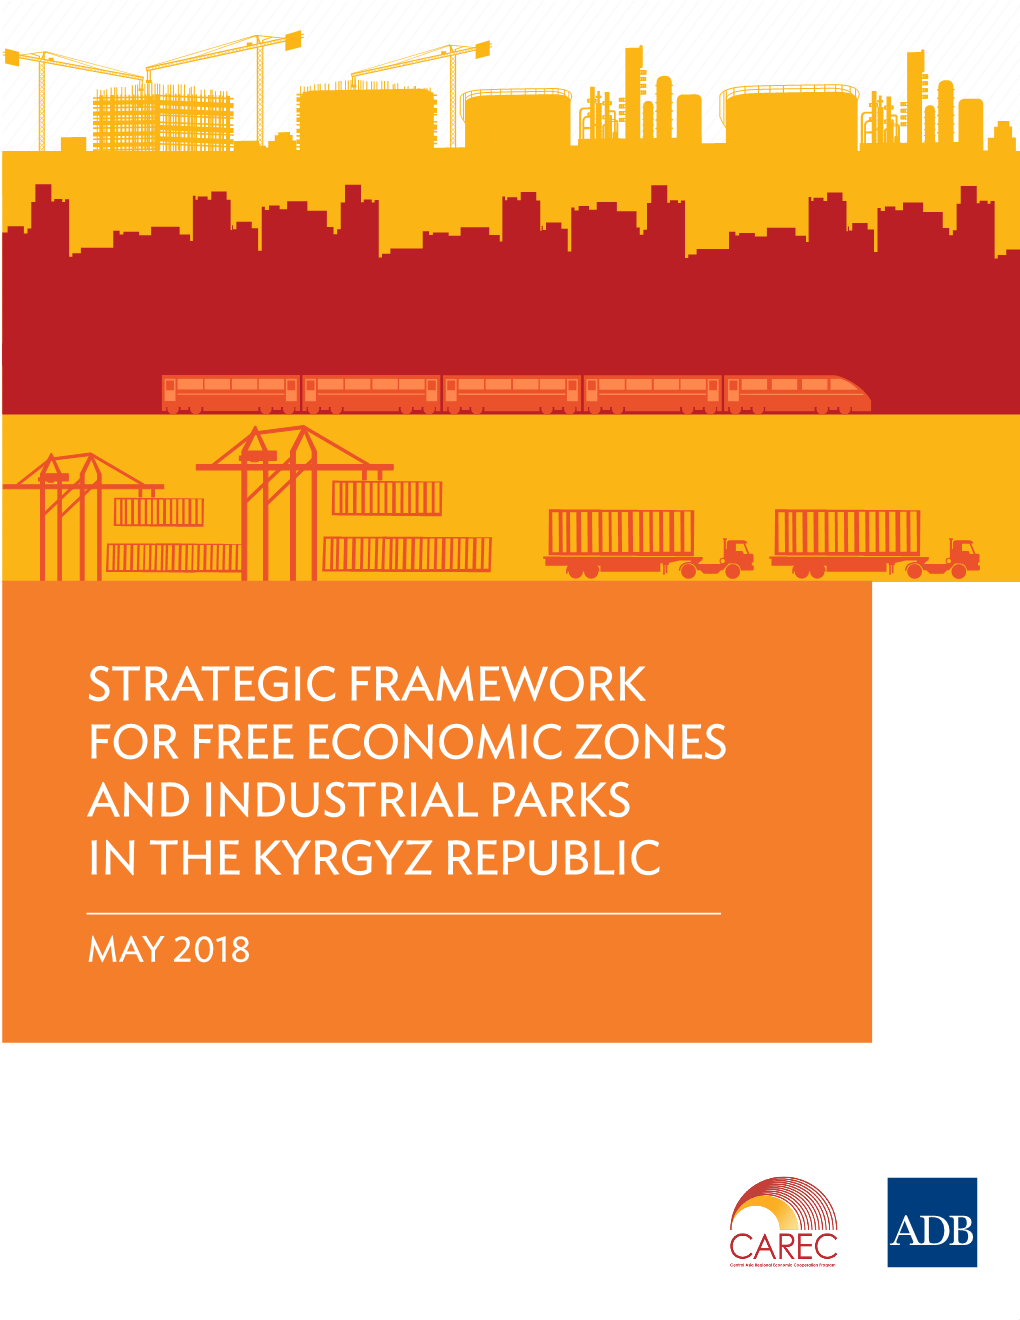 Strategic Framework for Free Economic Zones and Industrial Parks in the Kyrgyz Republic